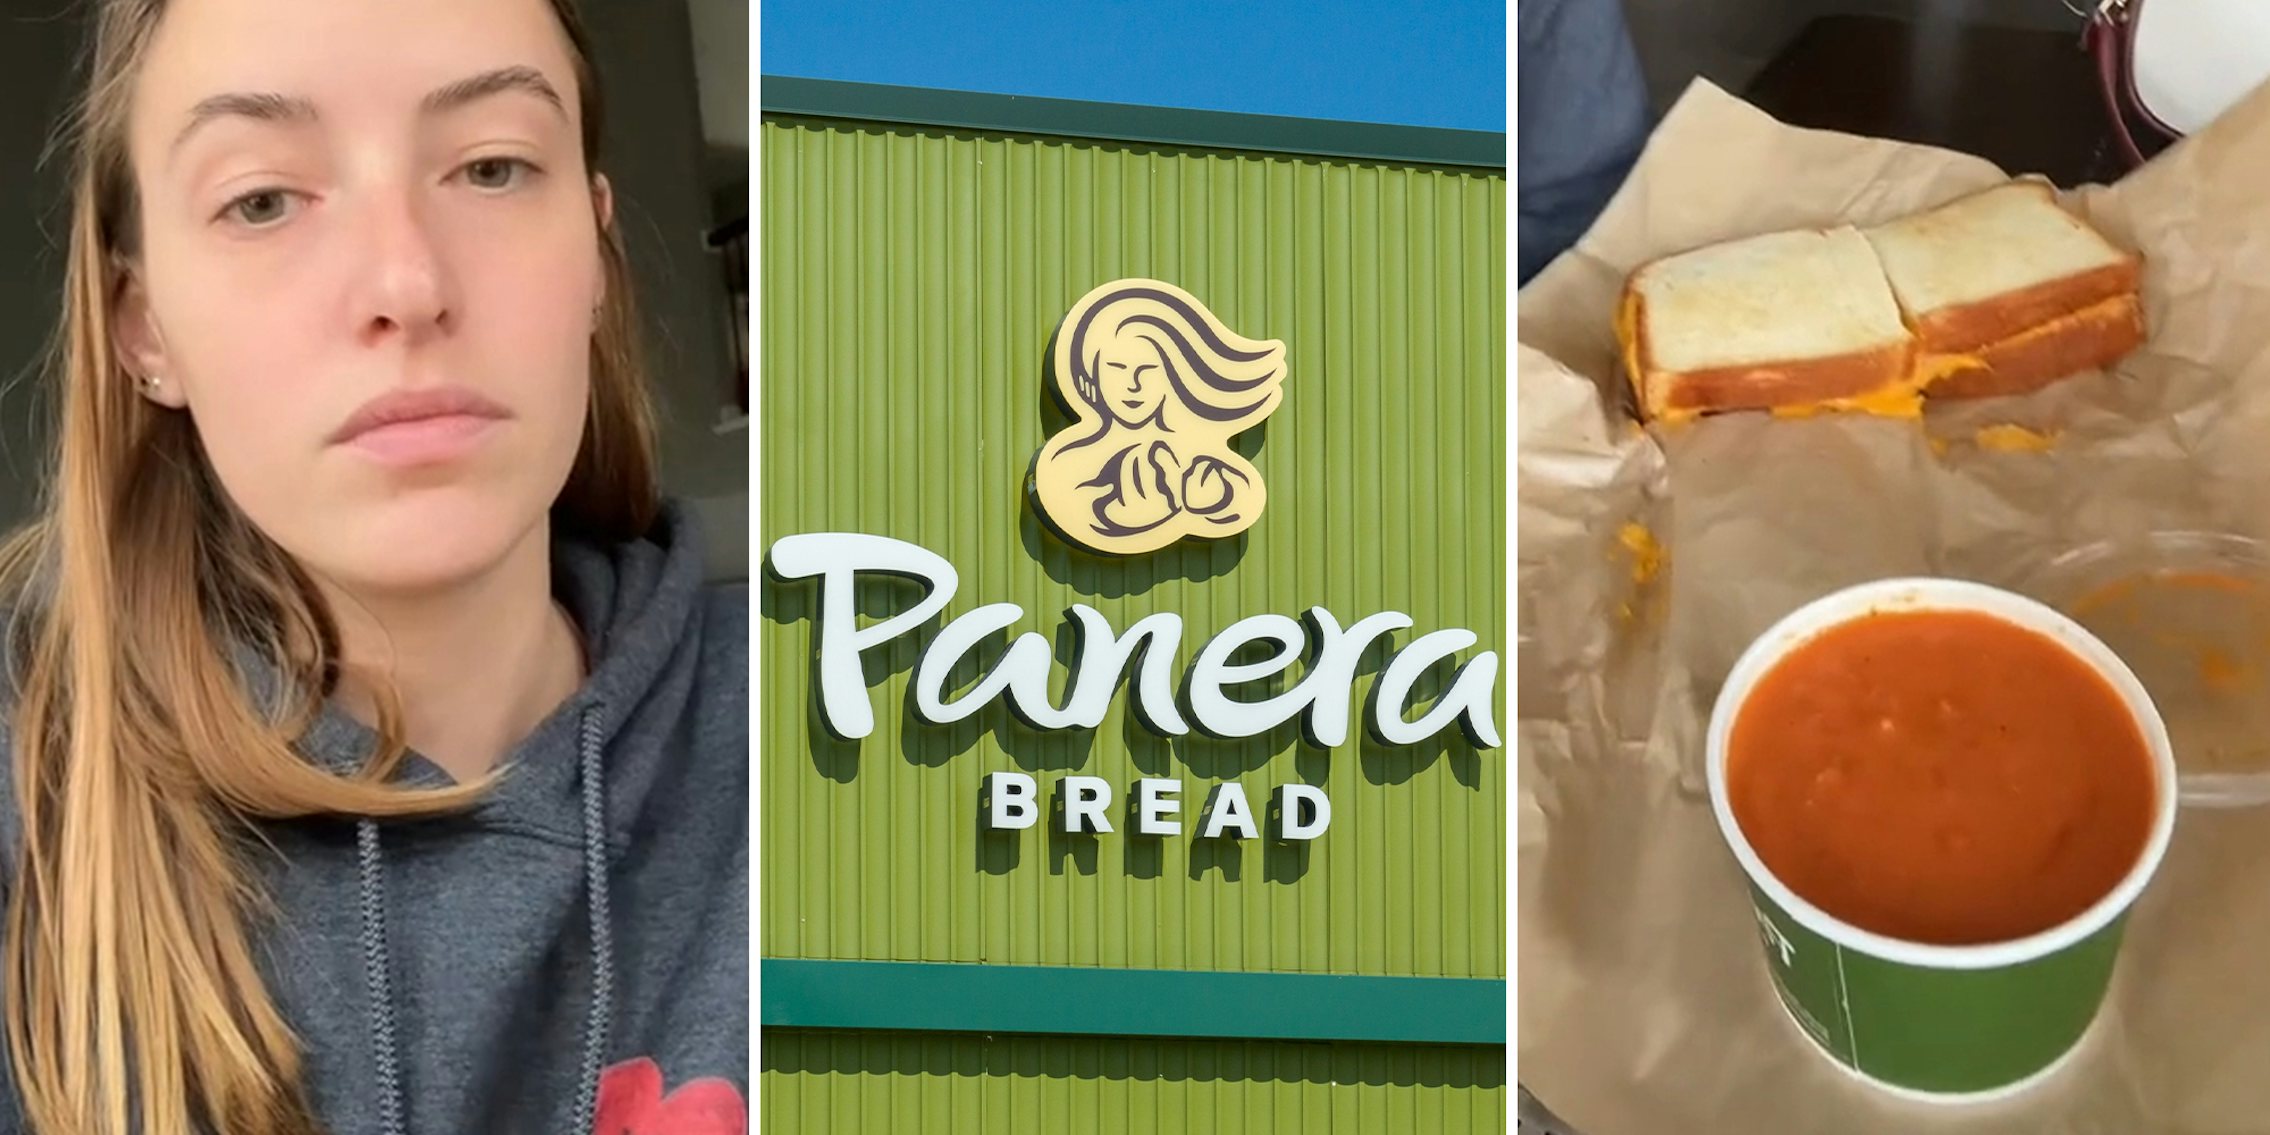 woman rants about expensive panera meal; Panera Restaurant Front; Panera Cheese Sandwich and Tomato sauce